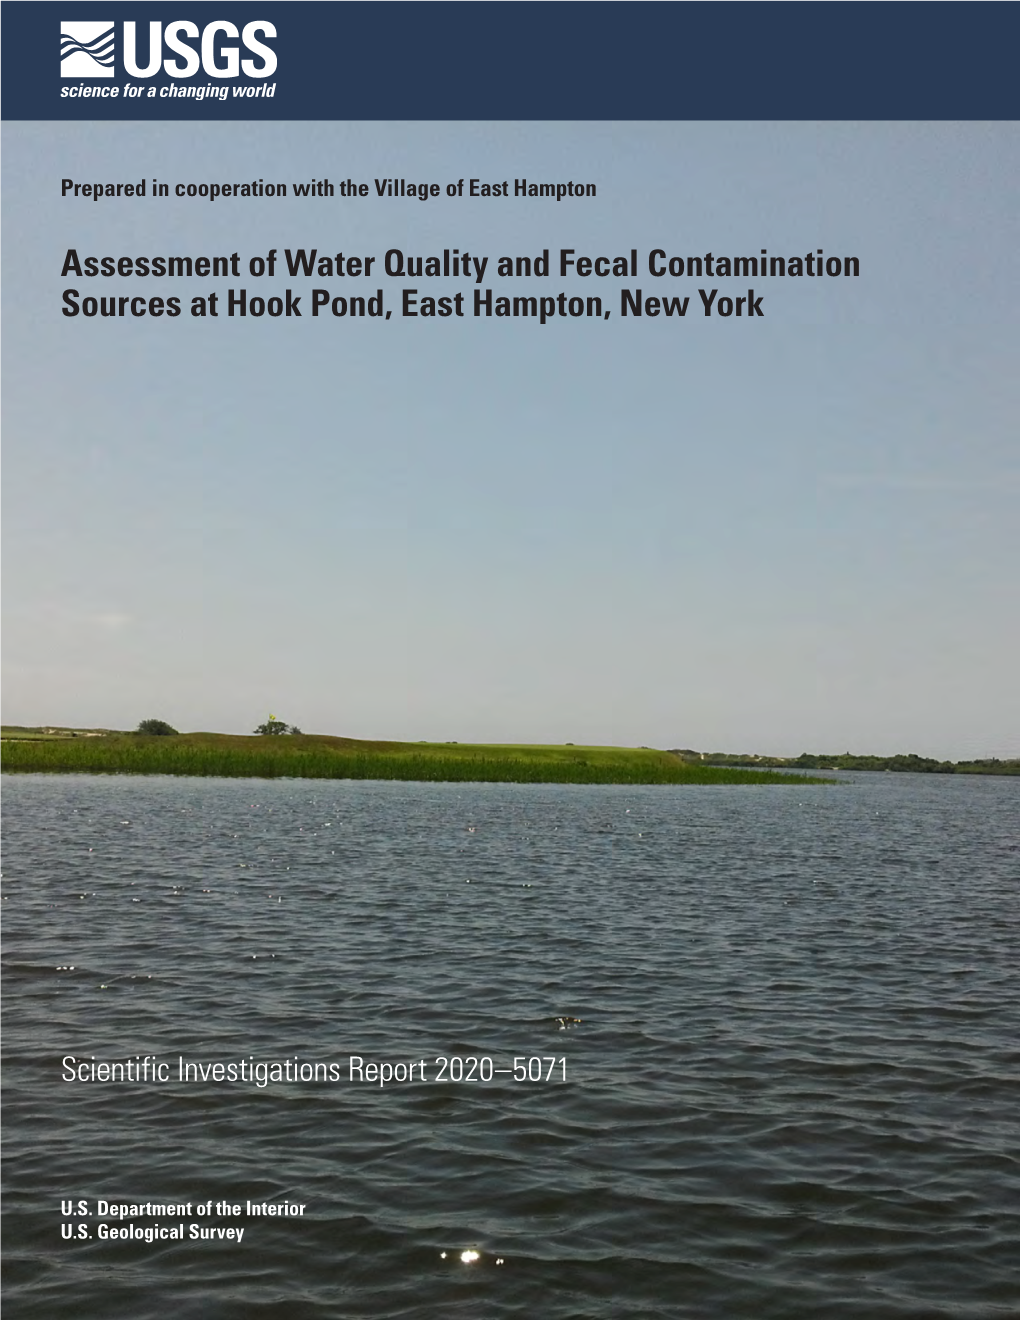 Assessment of Water Quality and Fecal Contamination Sources at Hook Pond, East Hampton, New York